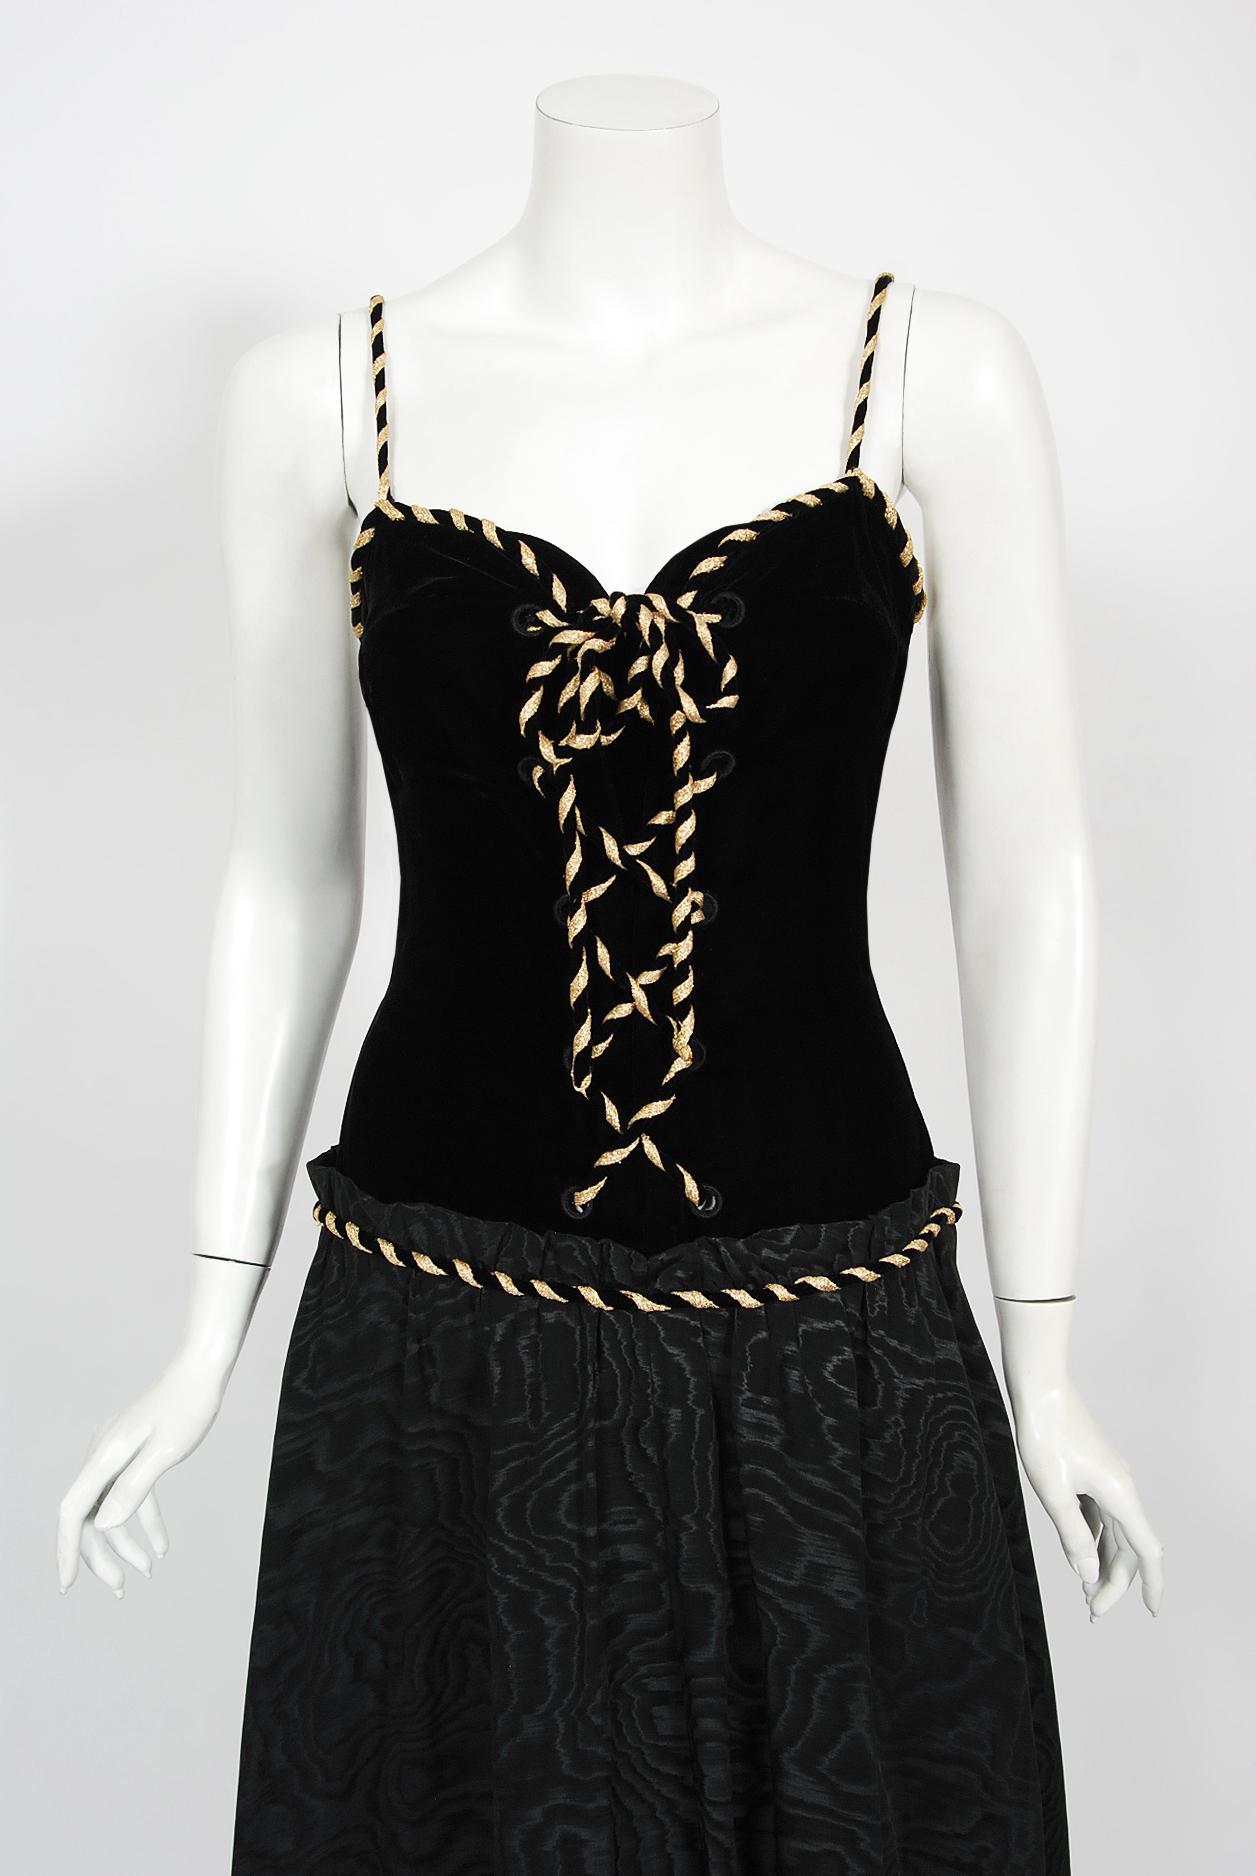 A seductive Loris Azzaro silk moiré and velvet low plunge lace-up corset gown dating back to the late 1970's. Loris Azzaro is famous for creating glamorous and provocative customized looks for celebrity elite. His timeless designs were favorites to